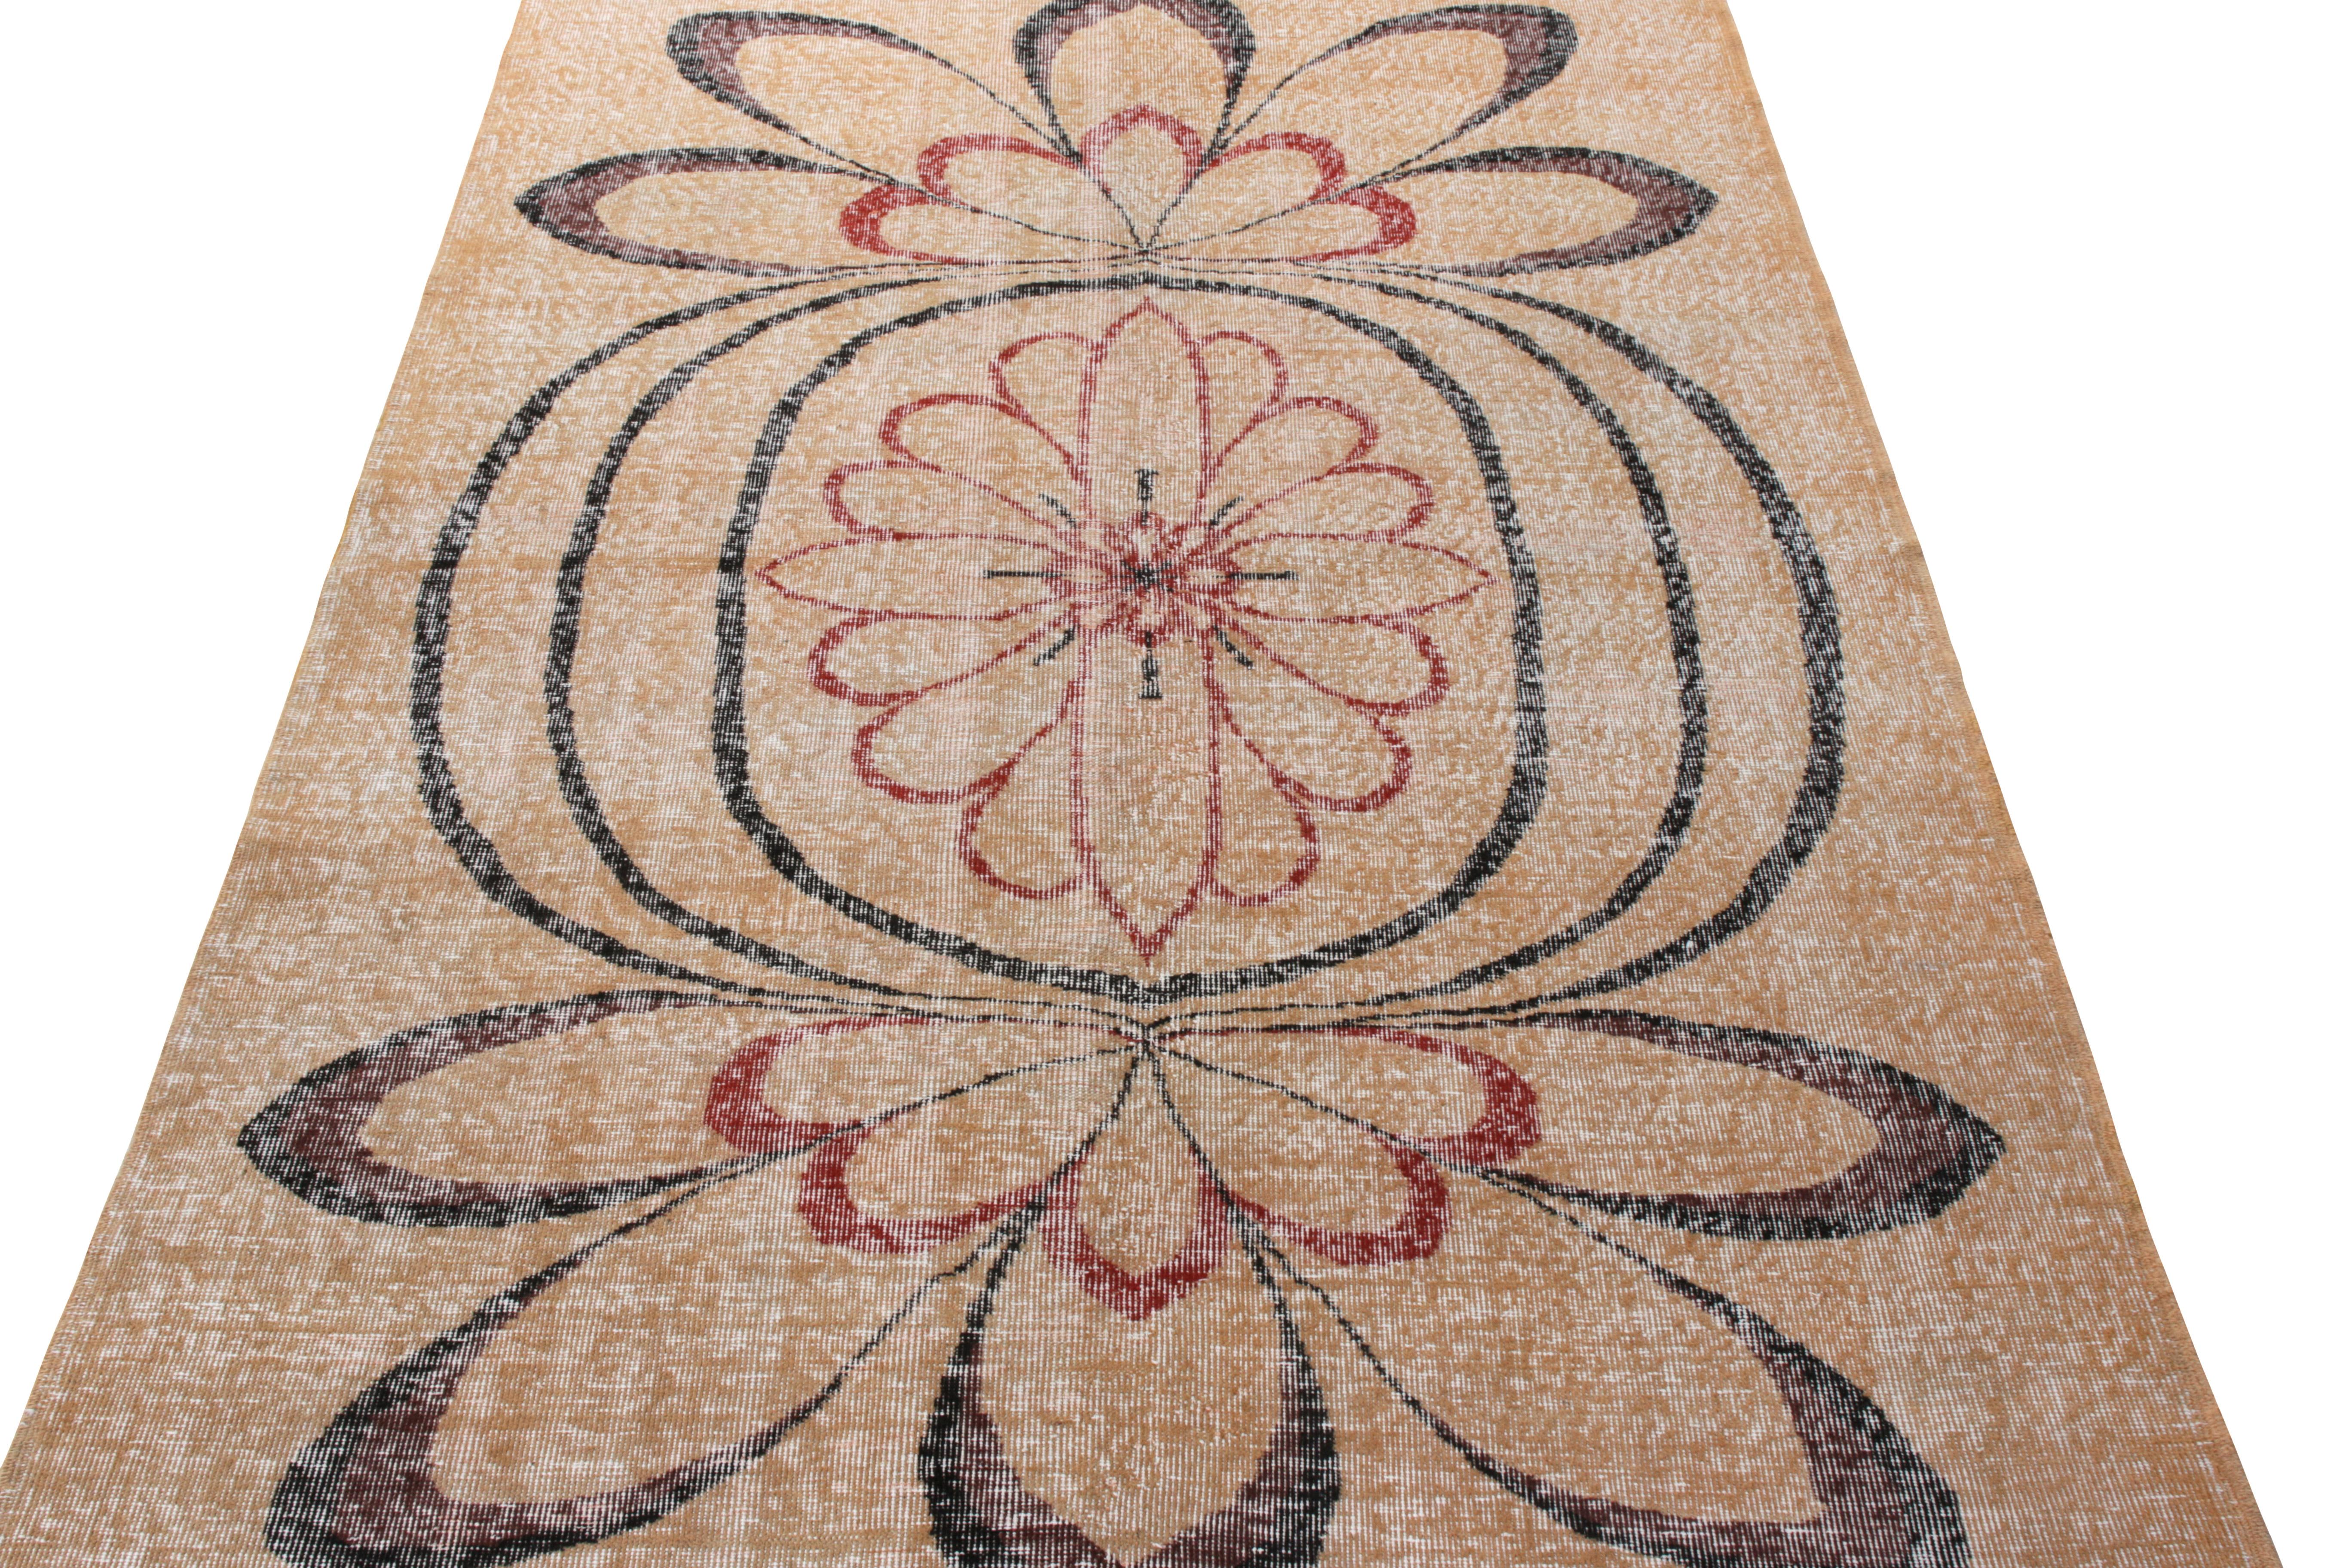 Hand-knotted in wool from Turkey originating between 1960-1970, this vintage mid-century 5x8 Deco rug belongs to Rug & Kilim’s expansive Mid-Century Pasha collection—celebrating the Turkish icon and multidisciplinary designer Zeki Müren with Josh’s